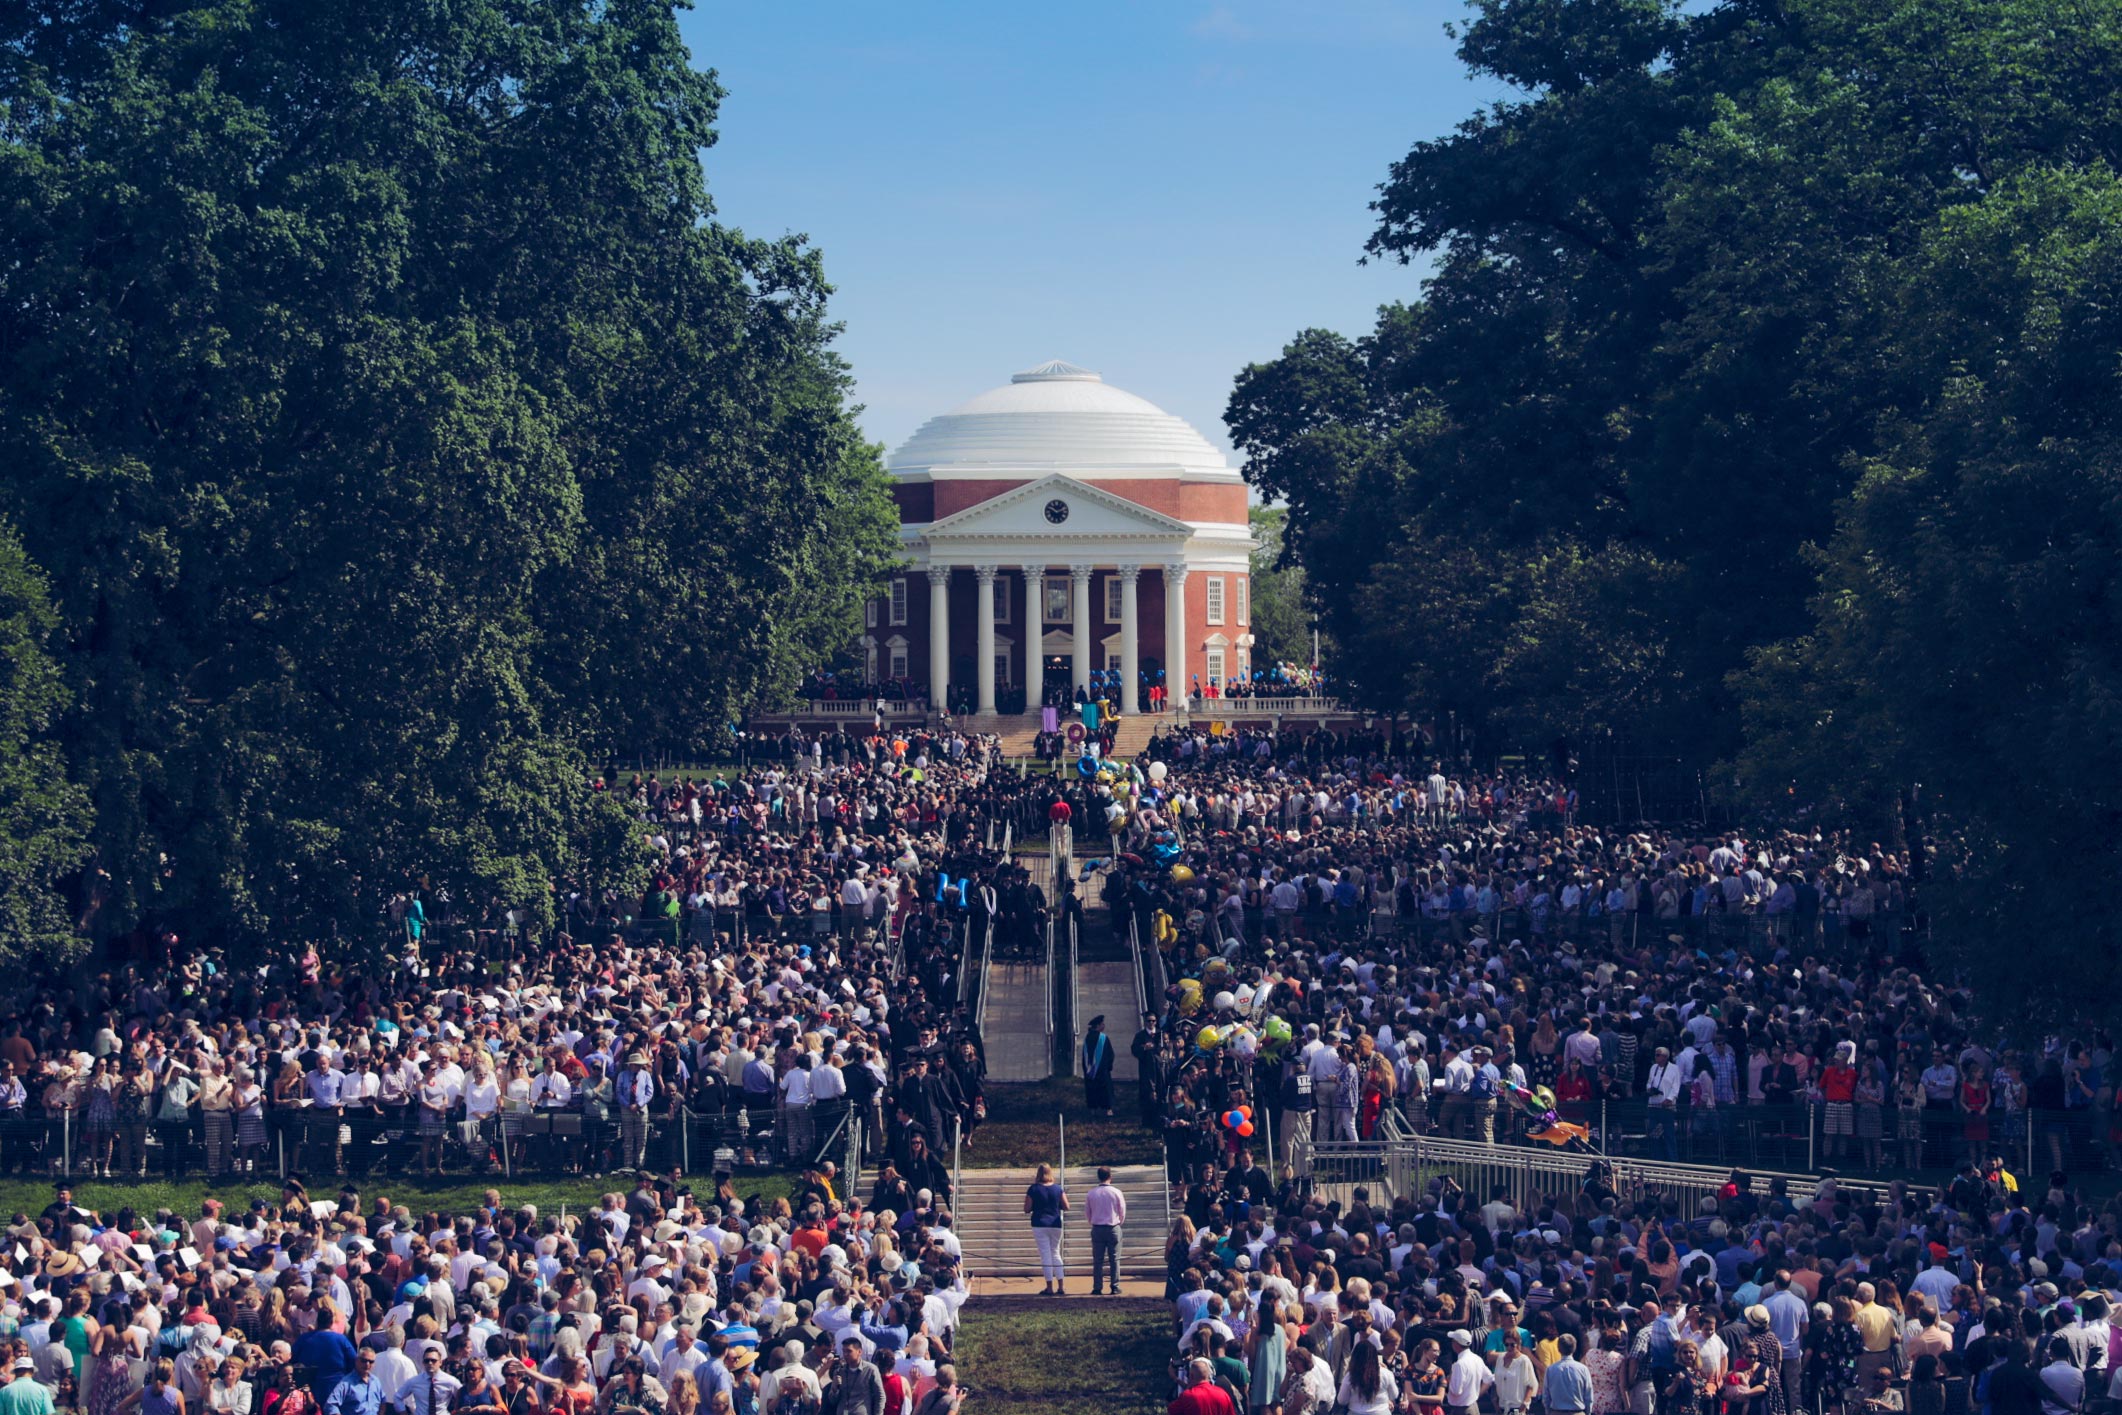 UVA Celebrates End of 2018-19 Academic Year With Three-Day Finals Weekend